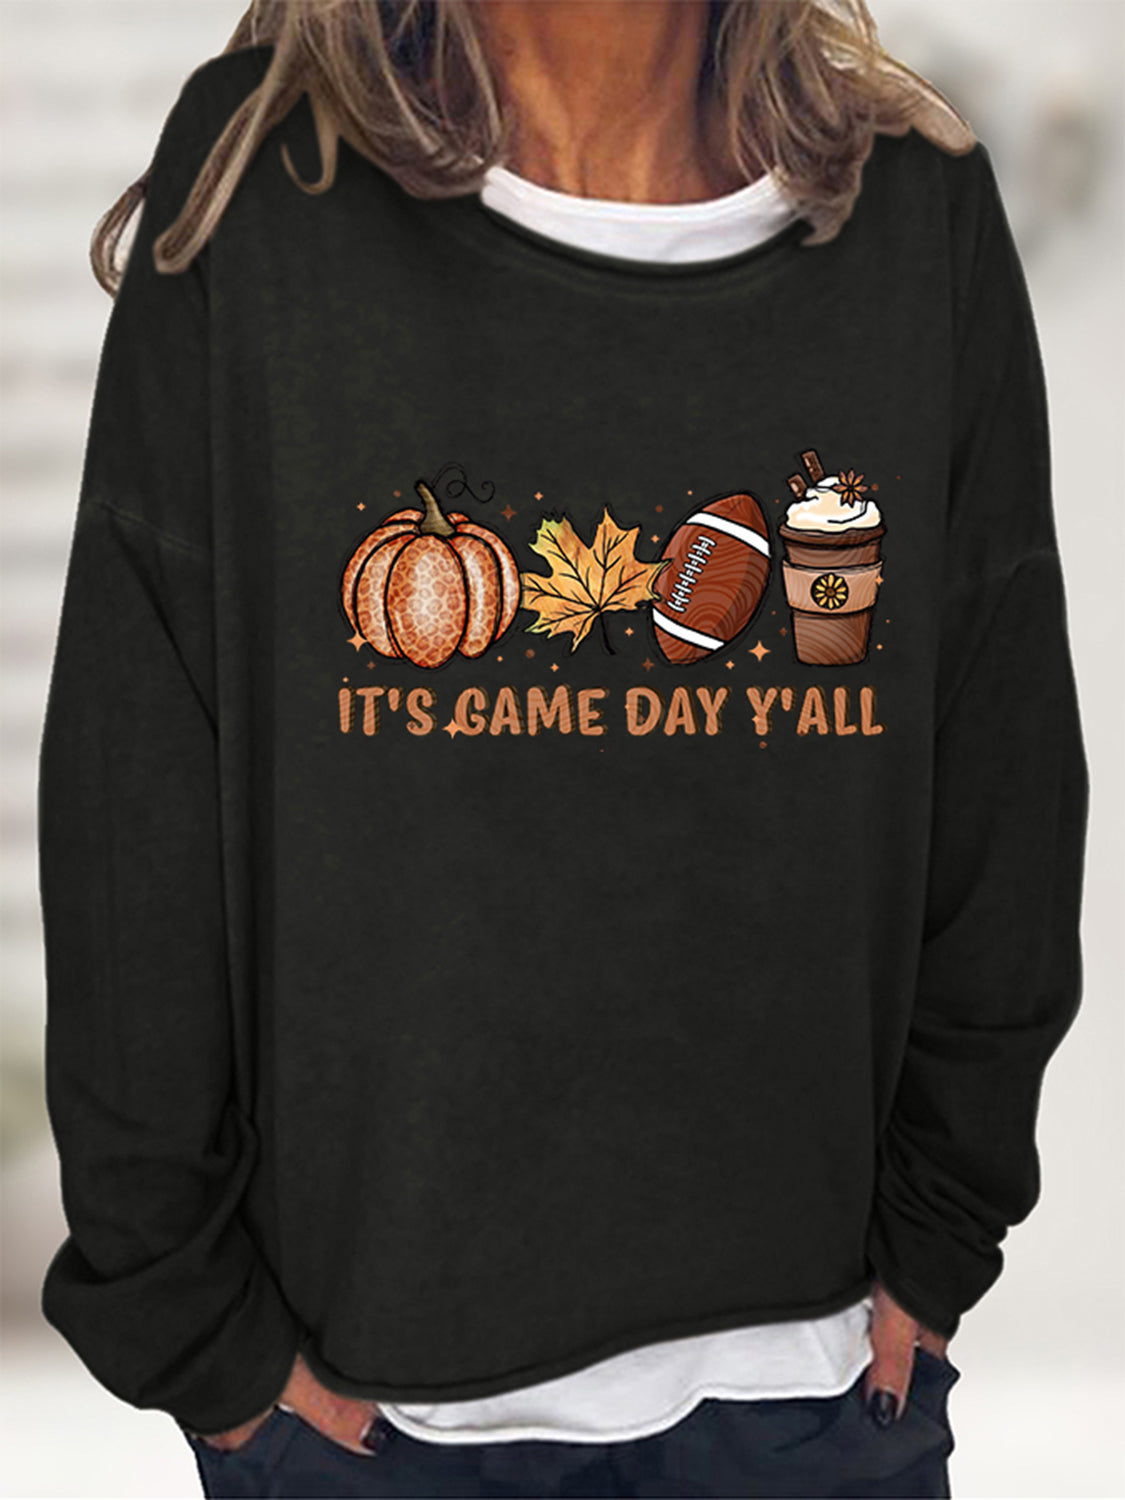 IT’S GAME DAY Y’ALL Graphic Sweatshirt - Black / S - T-Shirts - Shirts & Tops - 4 - 2024